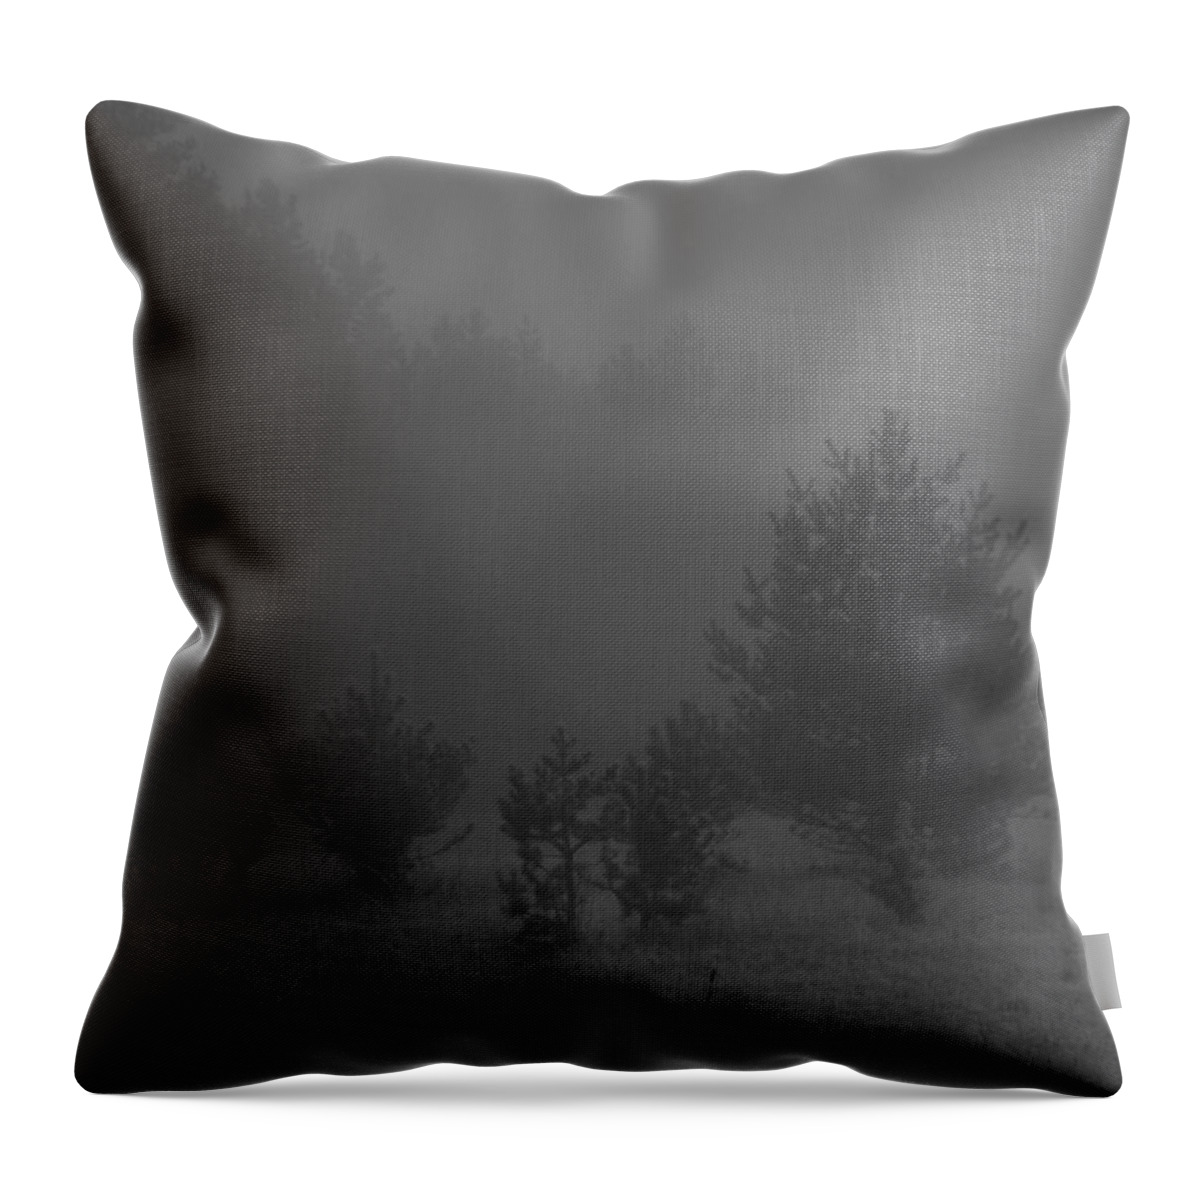 Fog Throw Pillow featuring the photograph Nebelbild 12 - Fog Image 12 by Mimulux Patricia No